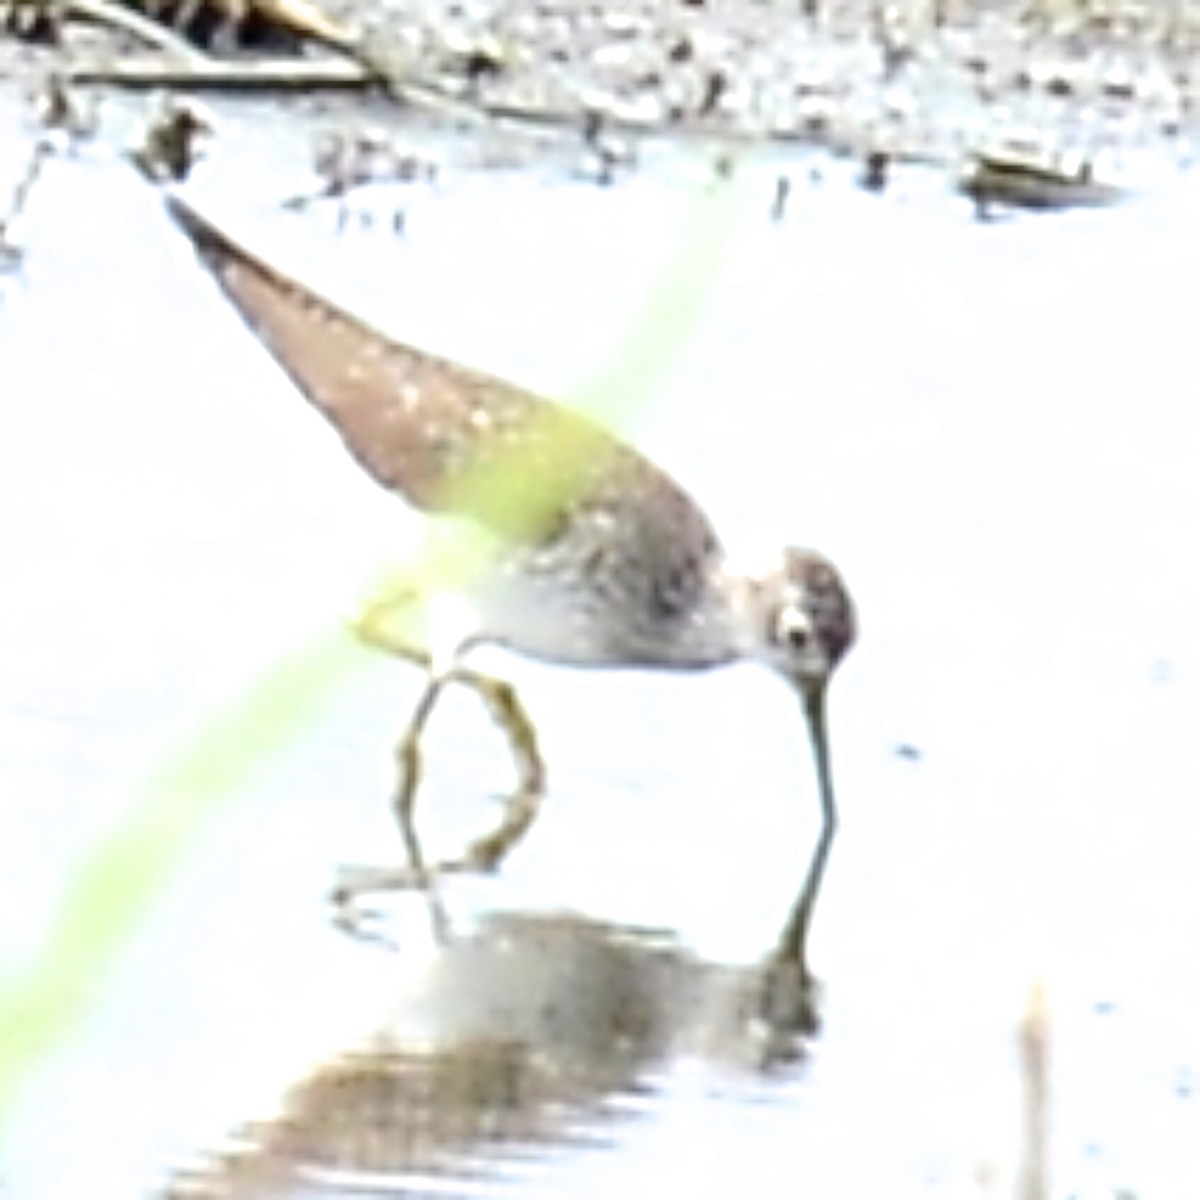 Solitary Sandpiper - T Reed